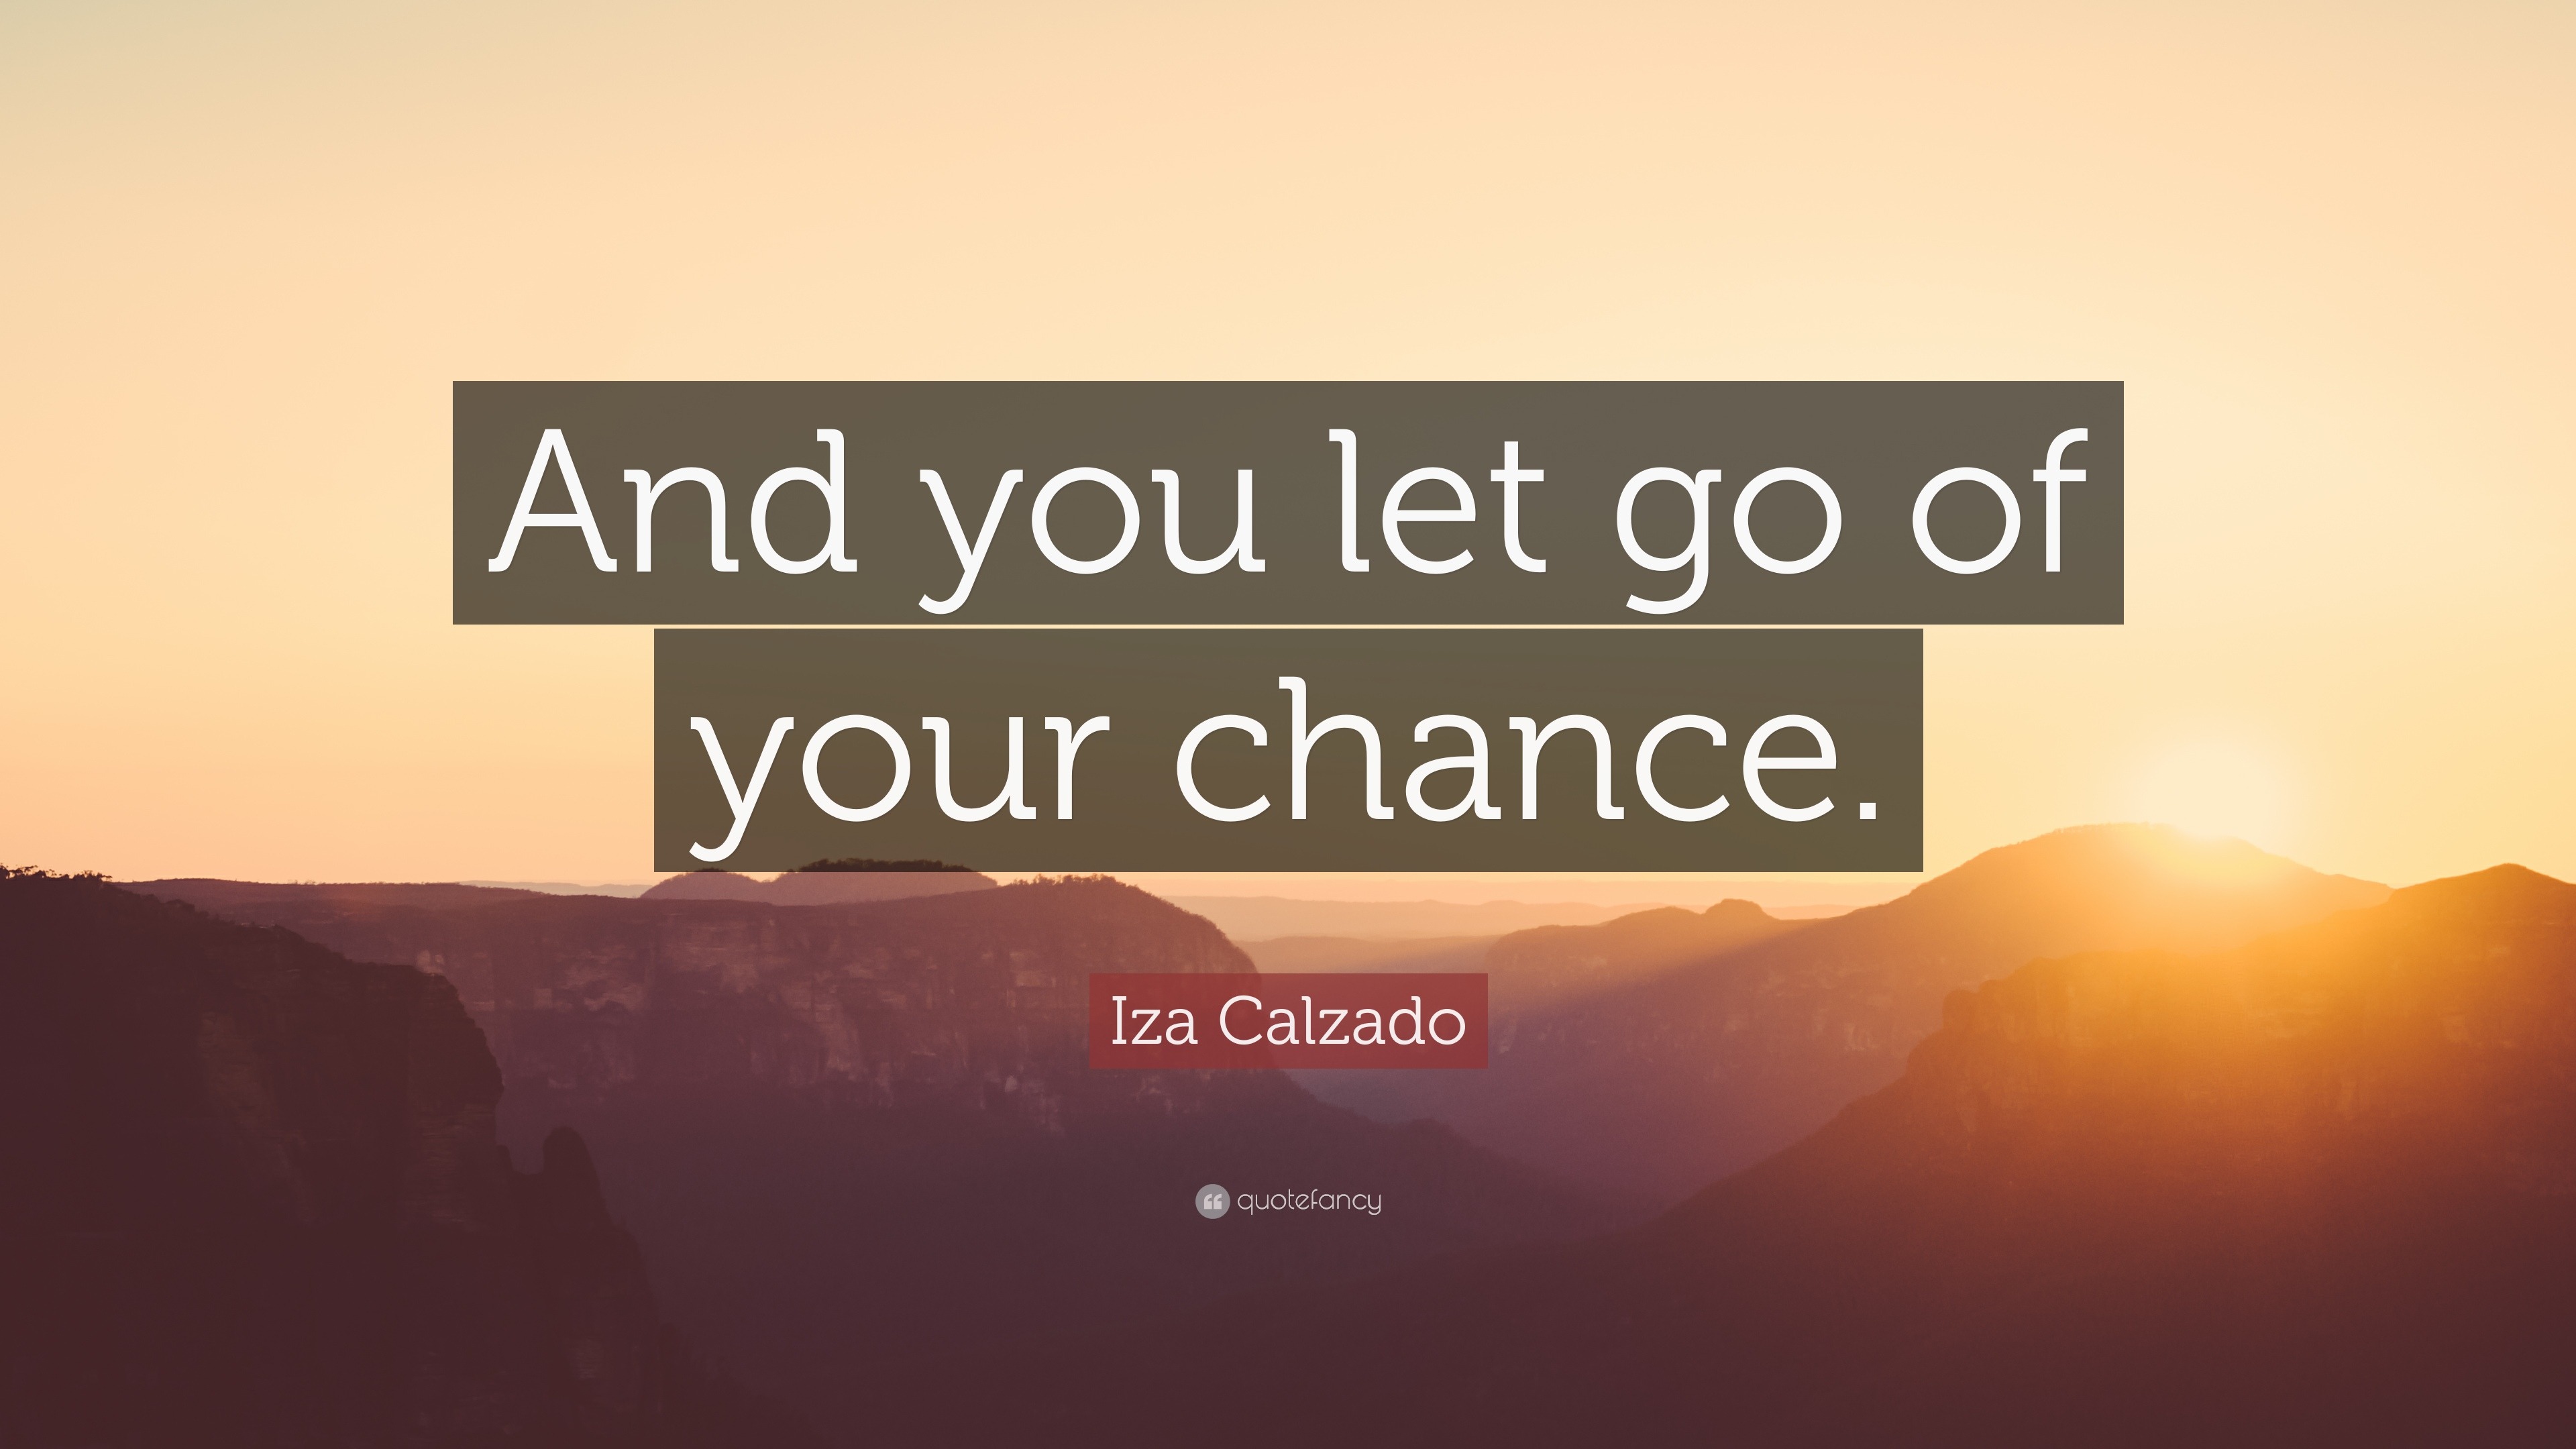 Iza Calzado Quote: “And you let go of your chance.”